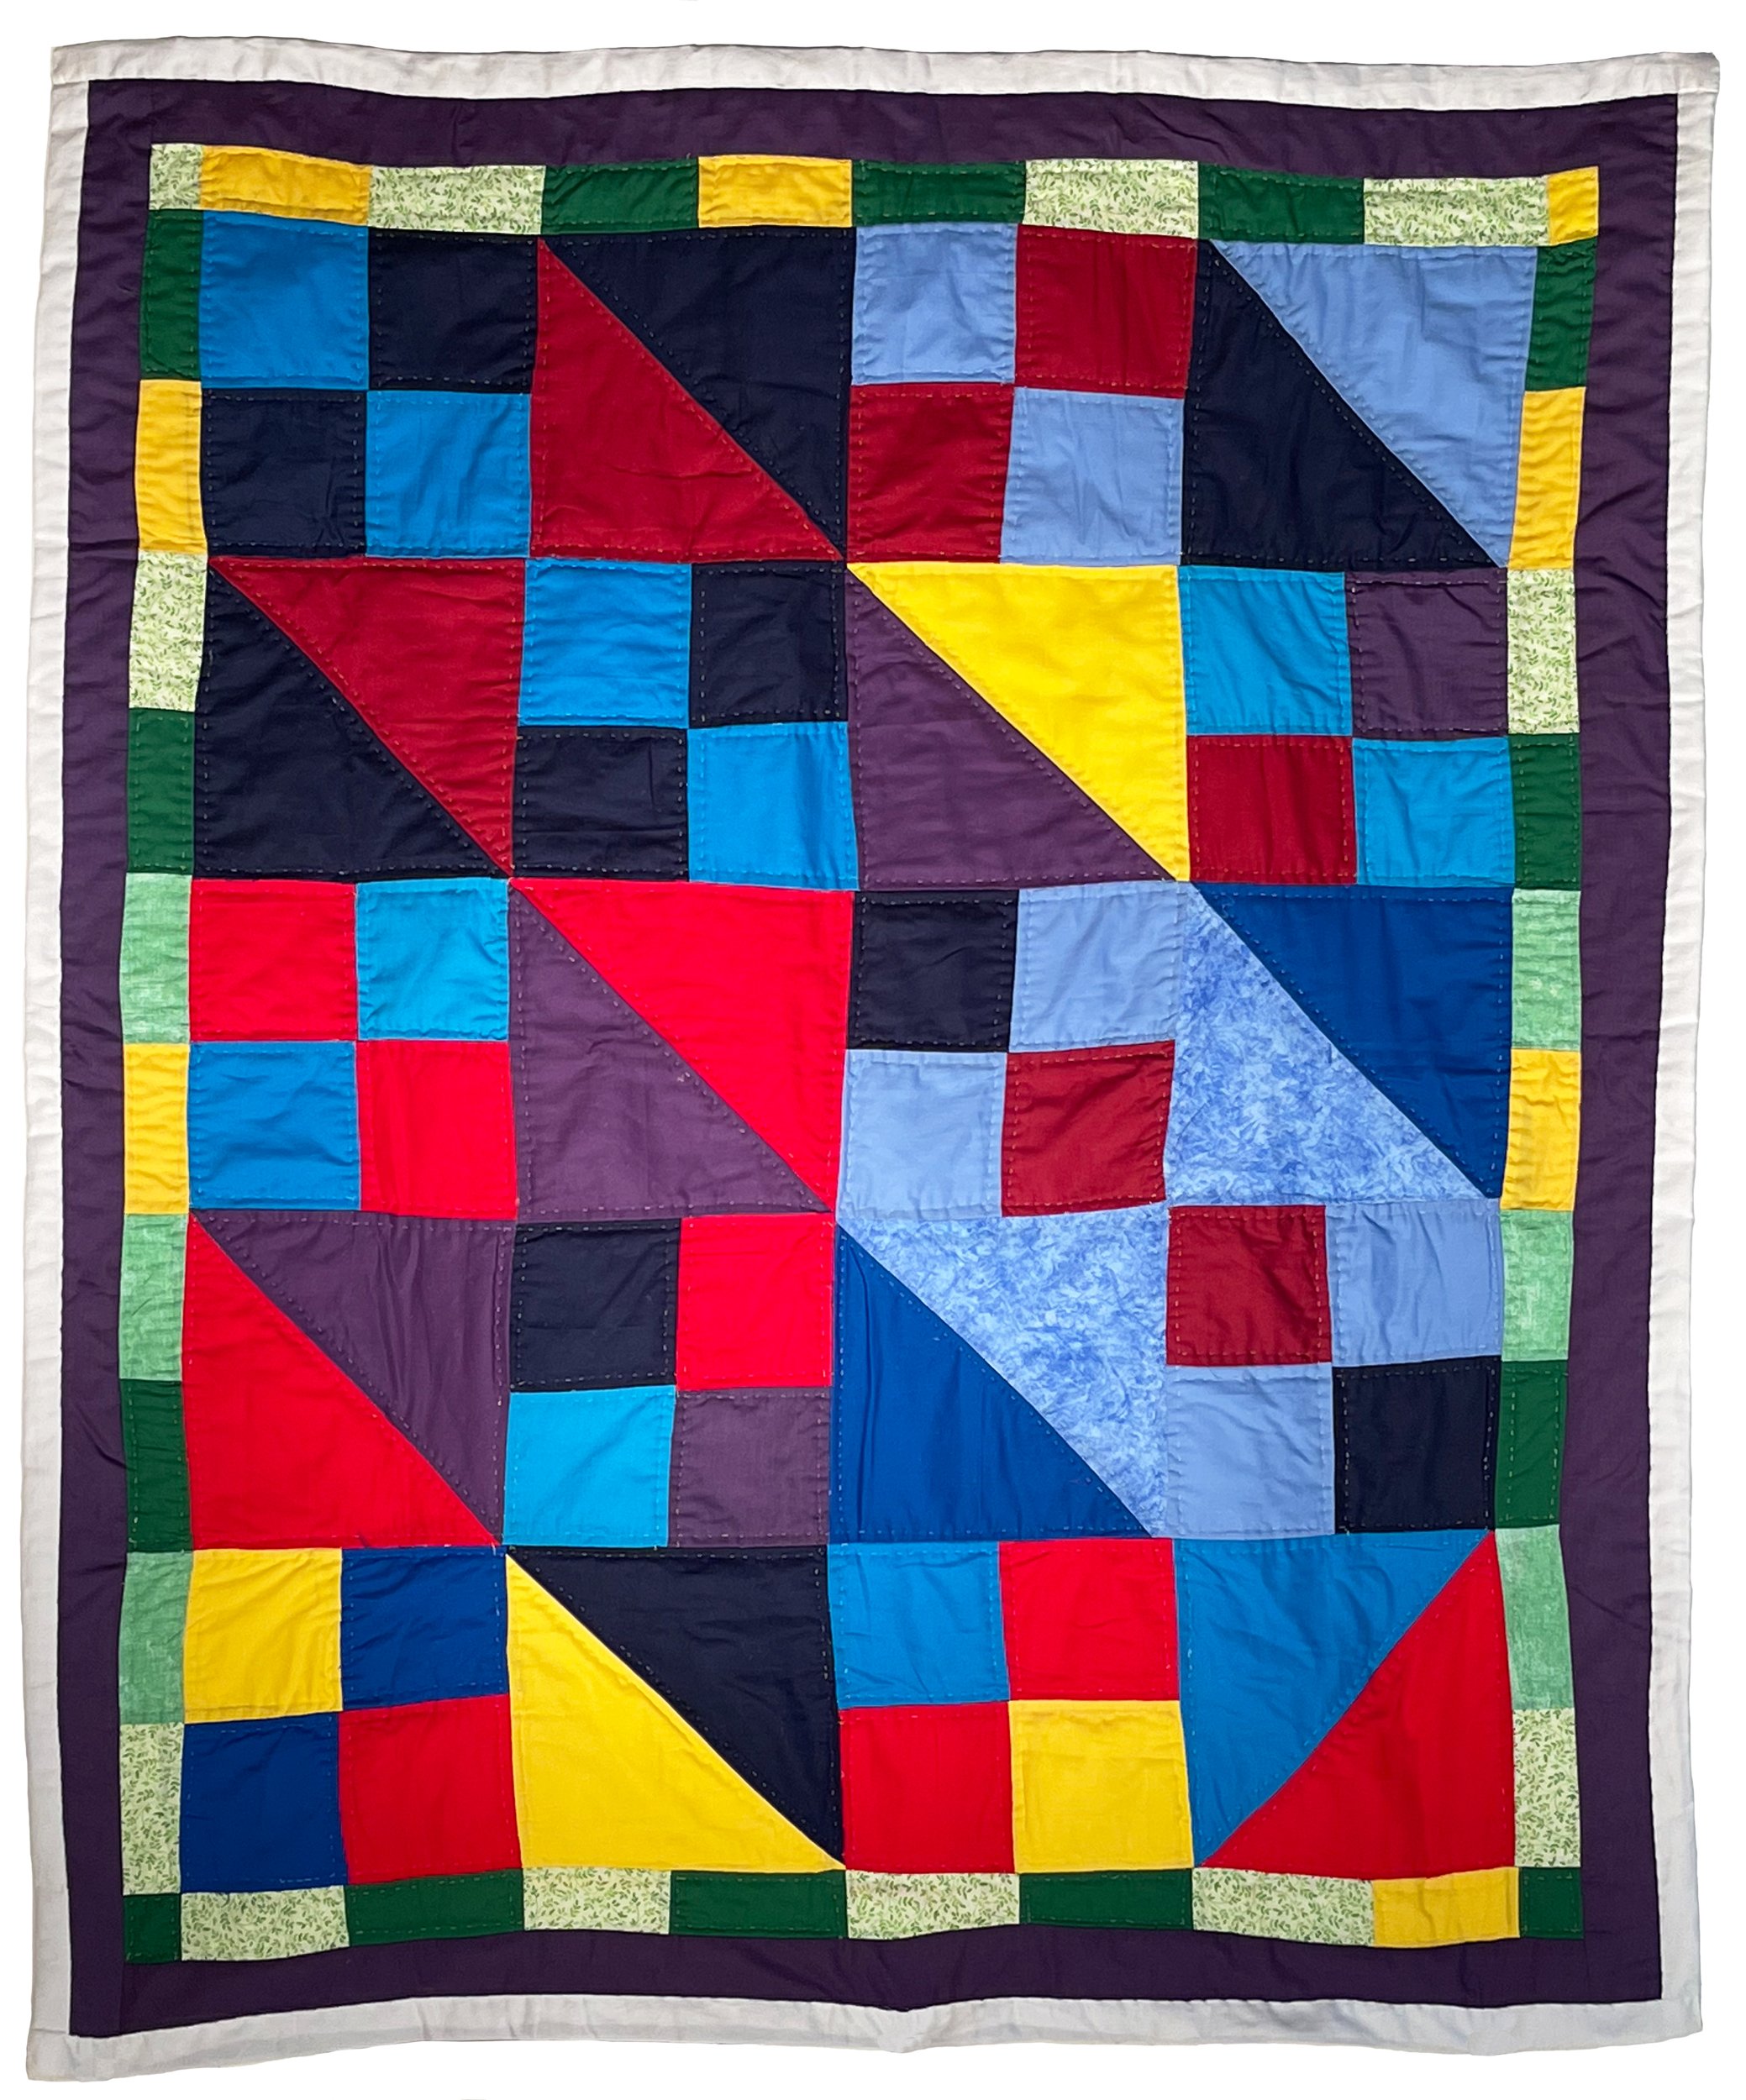   Doris Pettway Hacketts, Gee’s Bend, AL    Jacob’s Ladder variation,  2022  54" x 45"  Cotton fabrics  Hand-pieced, hand-quilted    ASK ABOUT THIS QUILT   